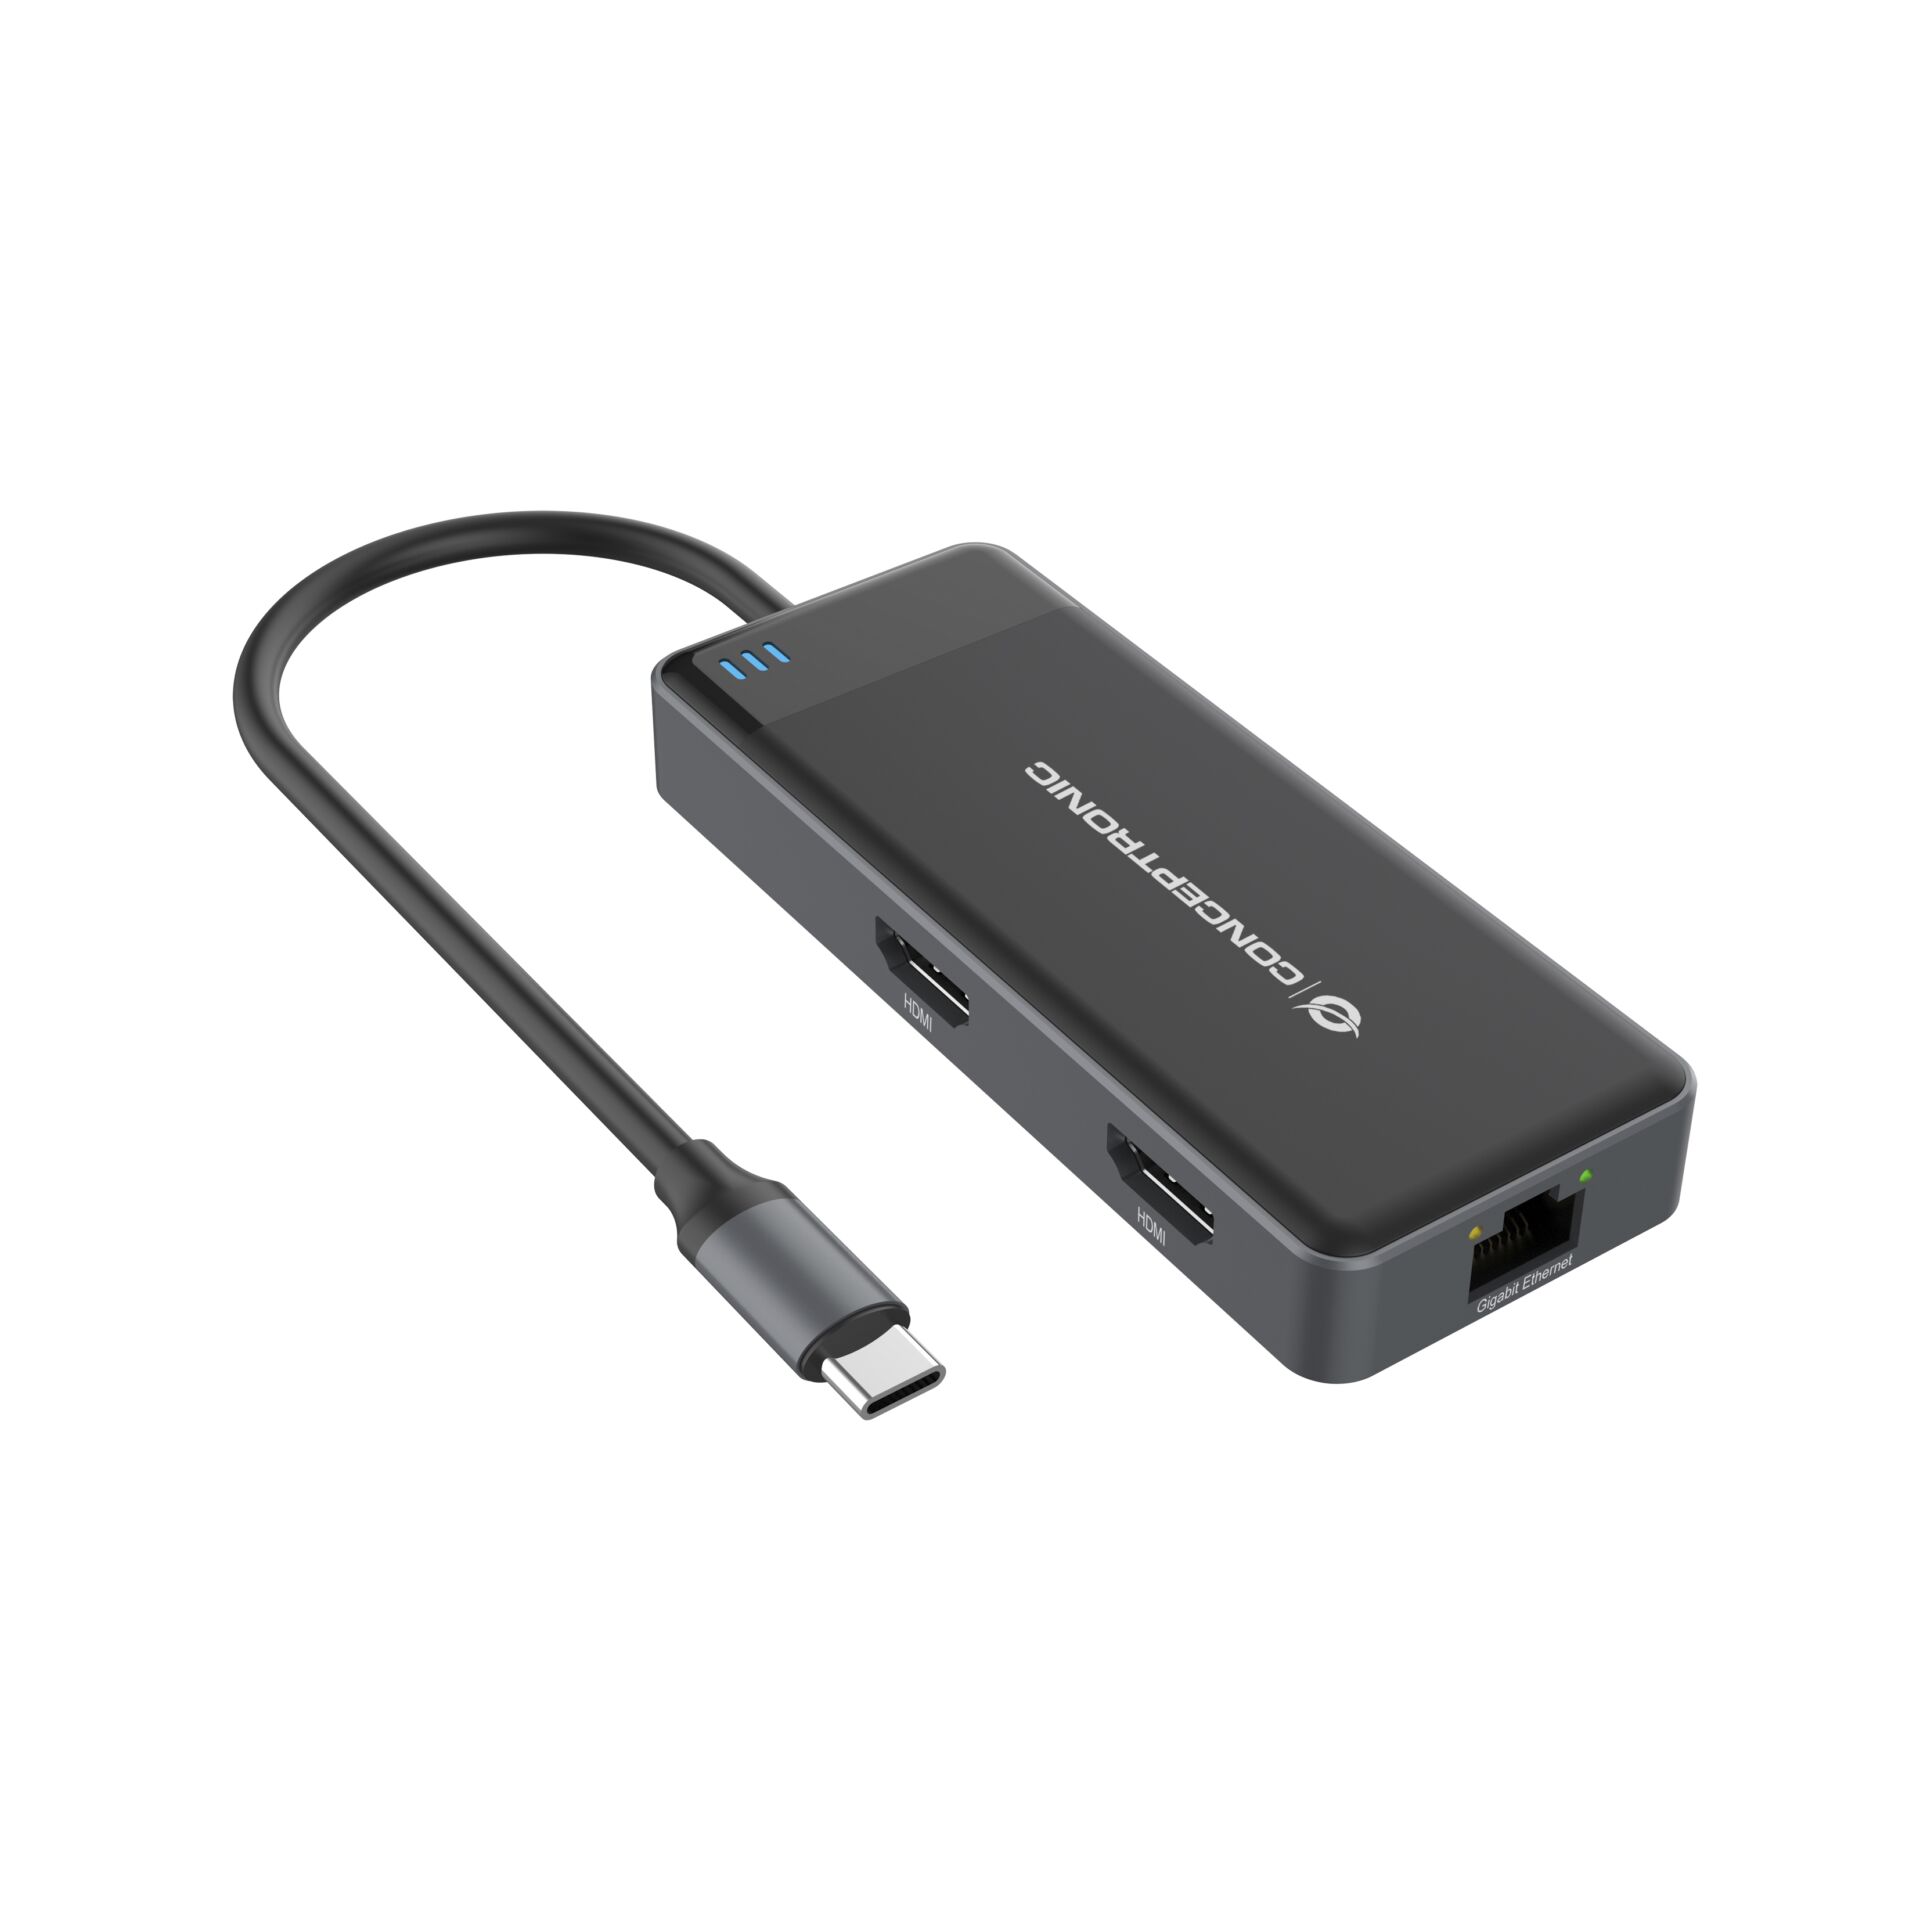 Conceptronic DONN14G 7-in1 USB 3.2 Docking